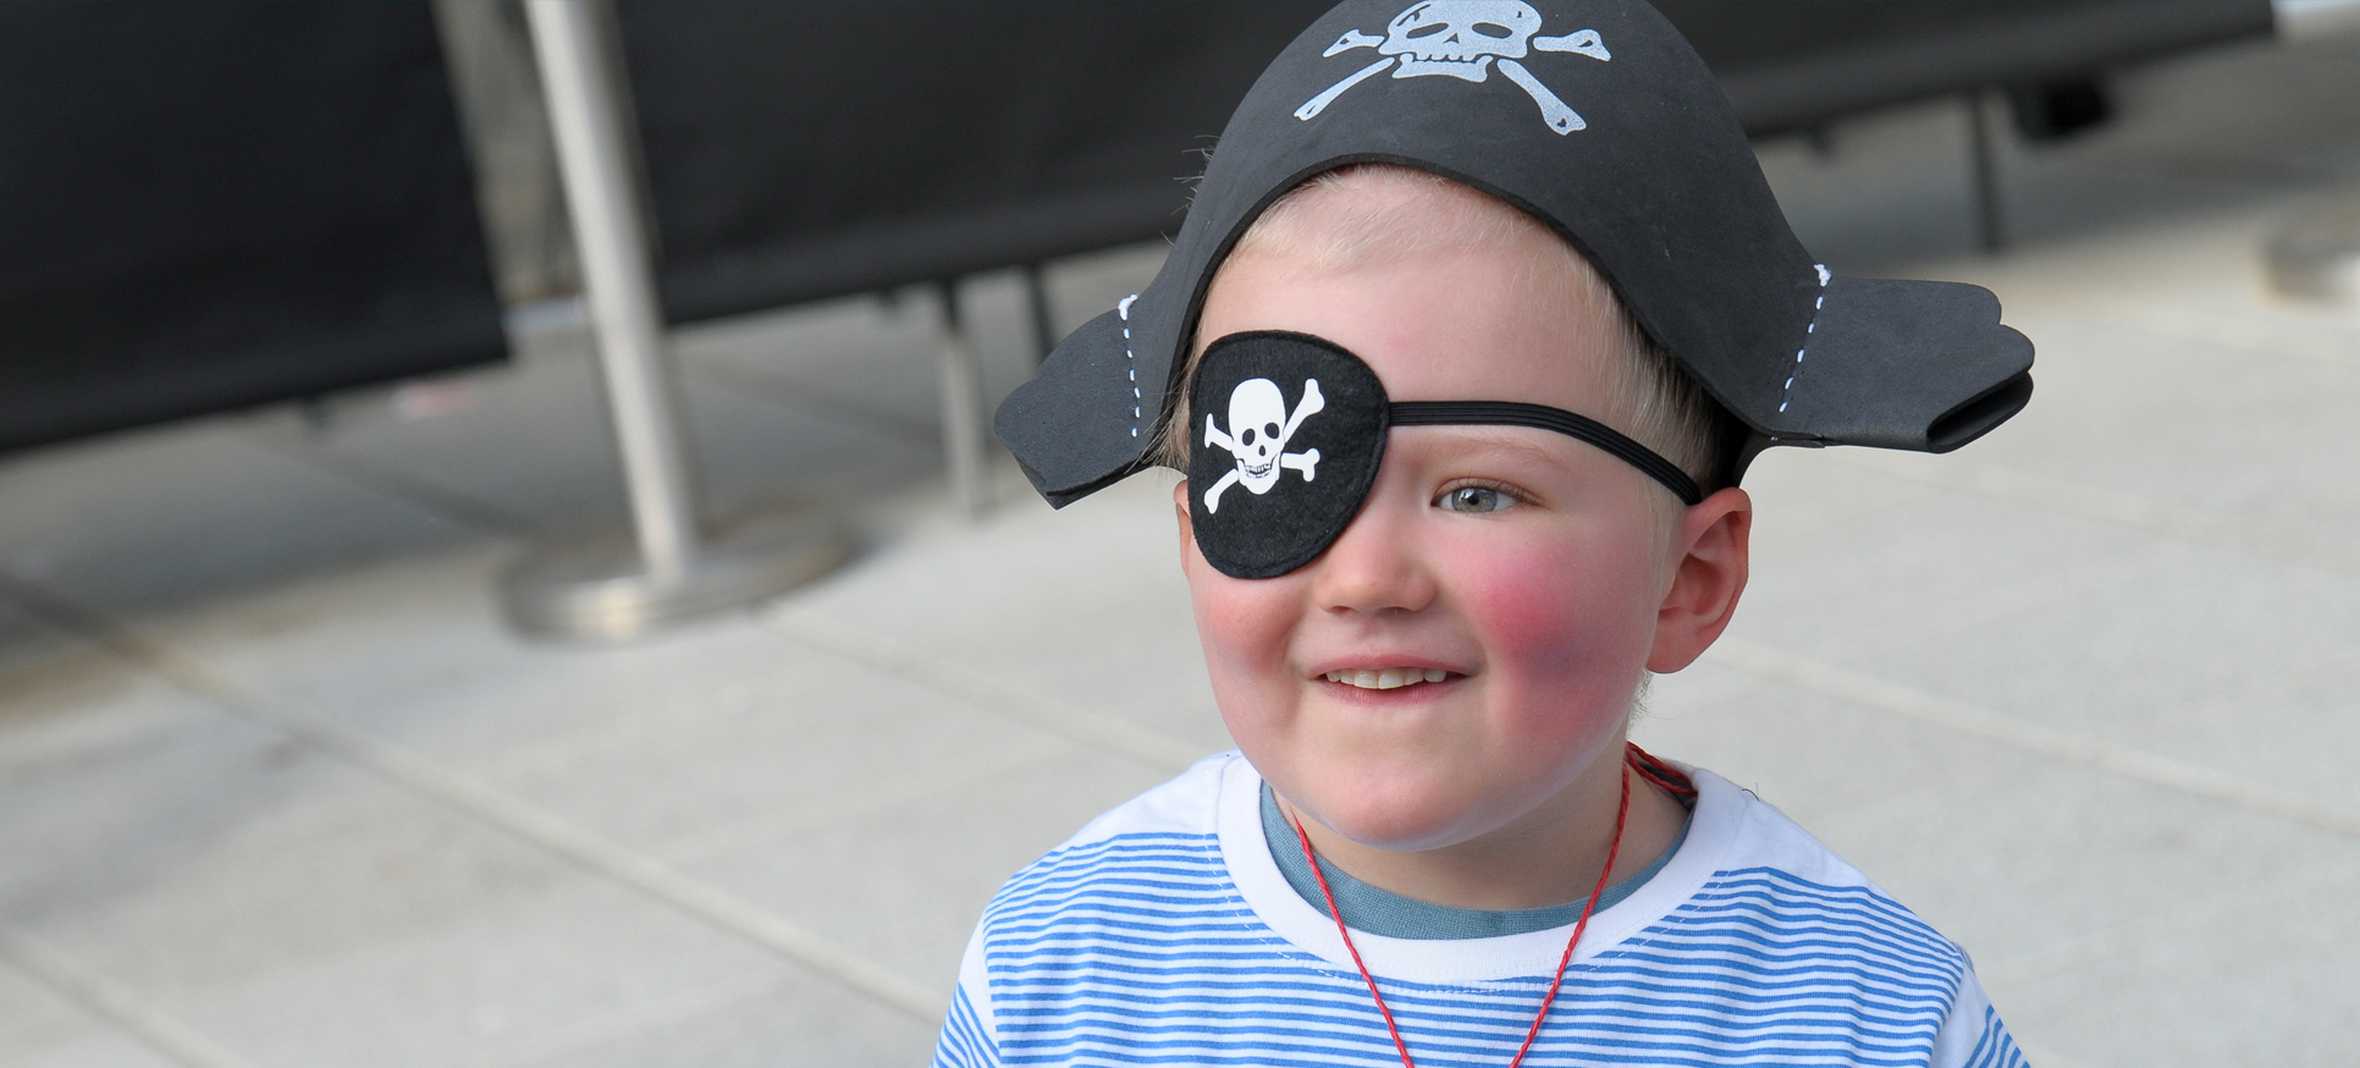 Sebbie with his eye patch and pirate hat ready for his pirate-themed wish